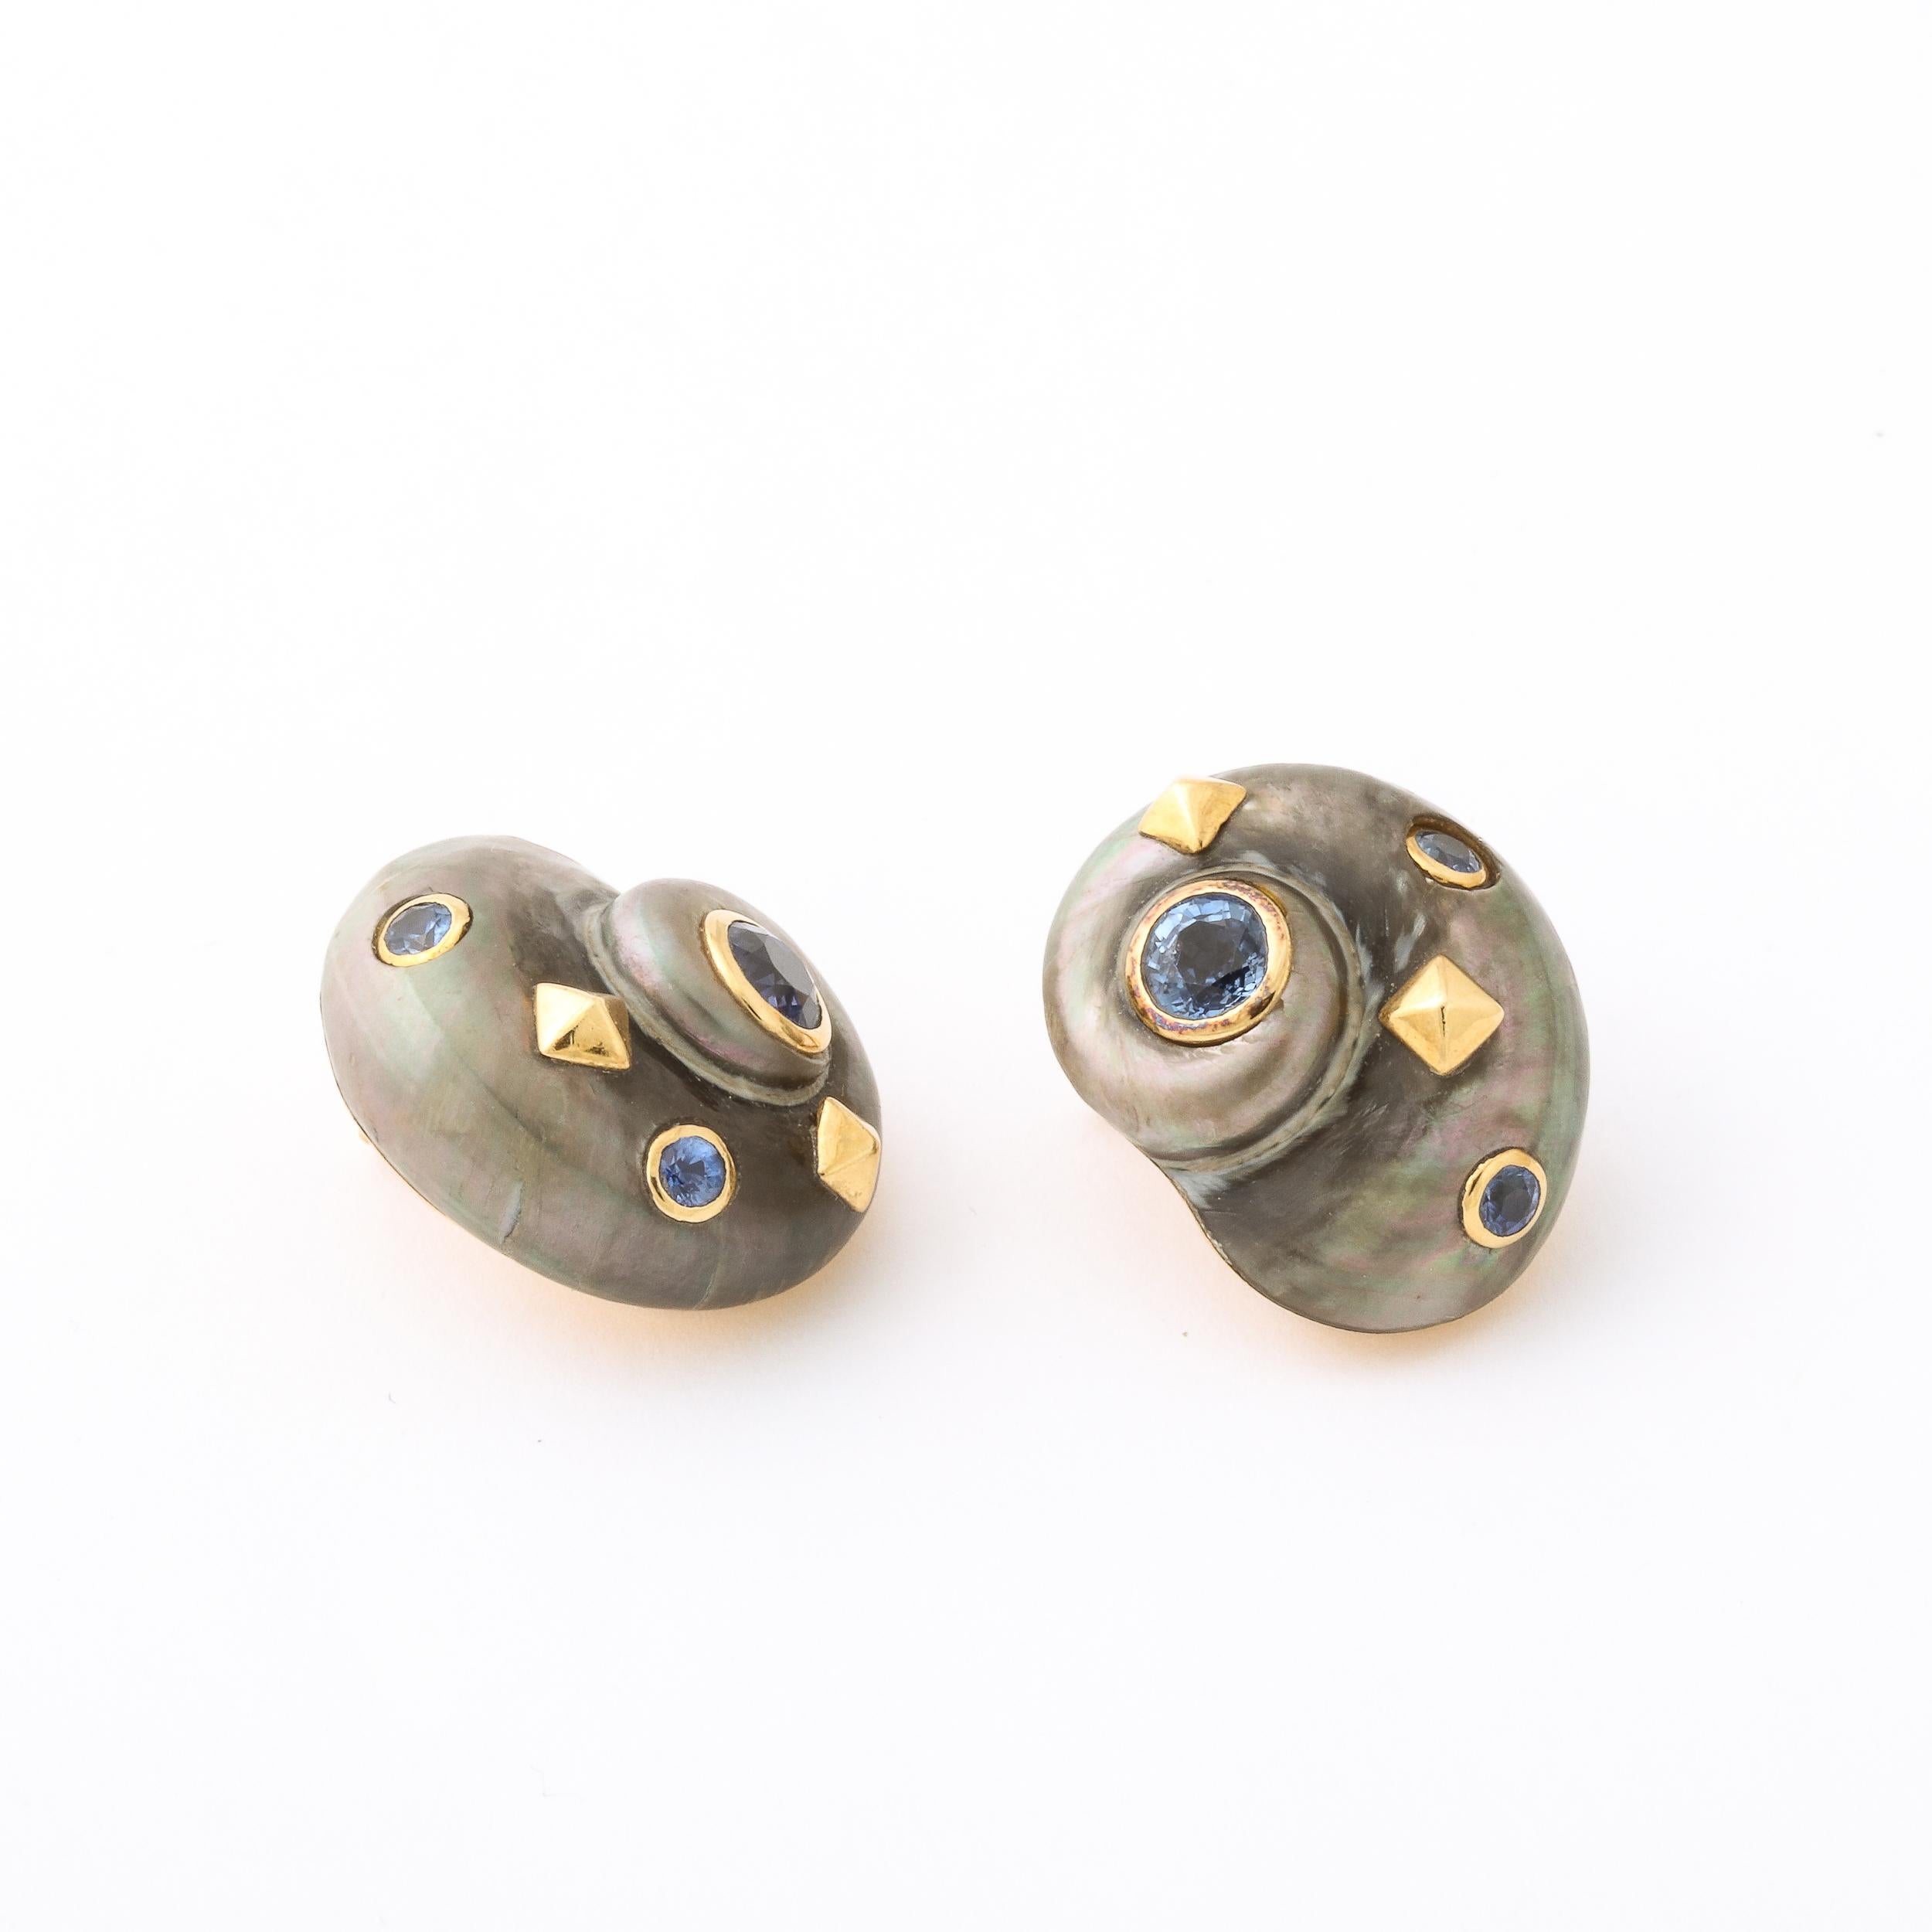 Iridescent Grey Shell Earrings Set in 18k Gold & Inlaid Blue Topaz by Trianon 4